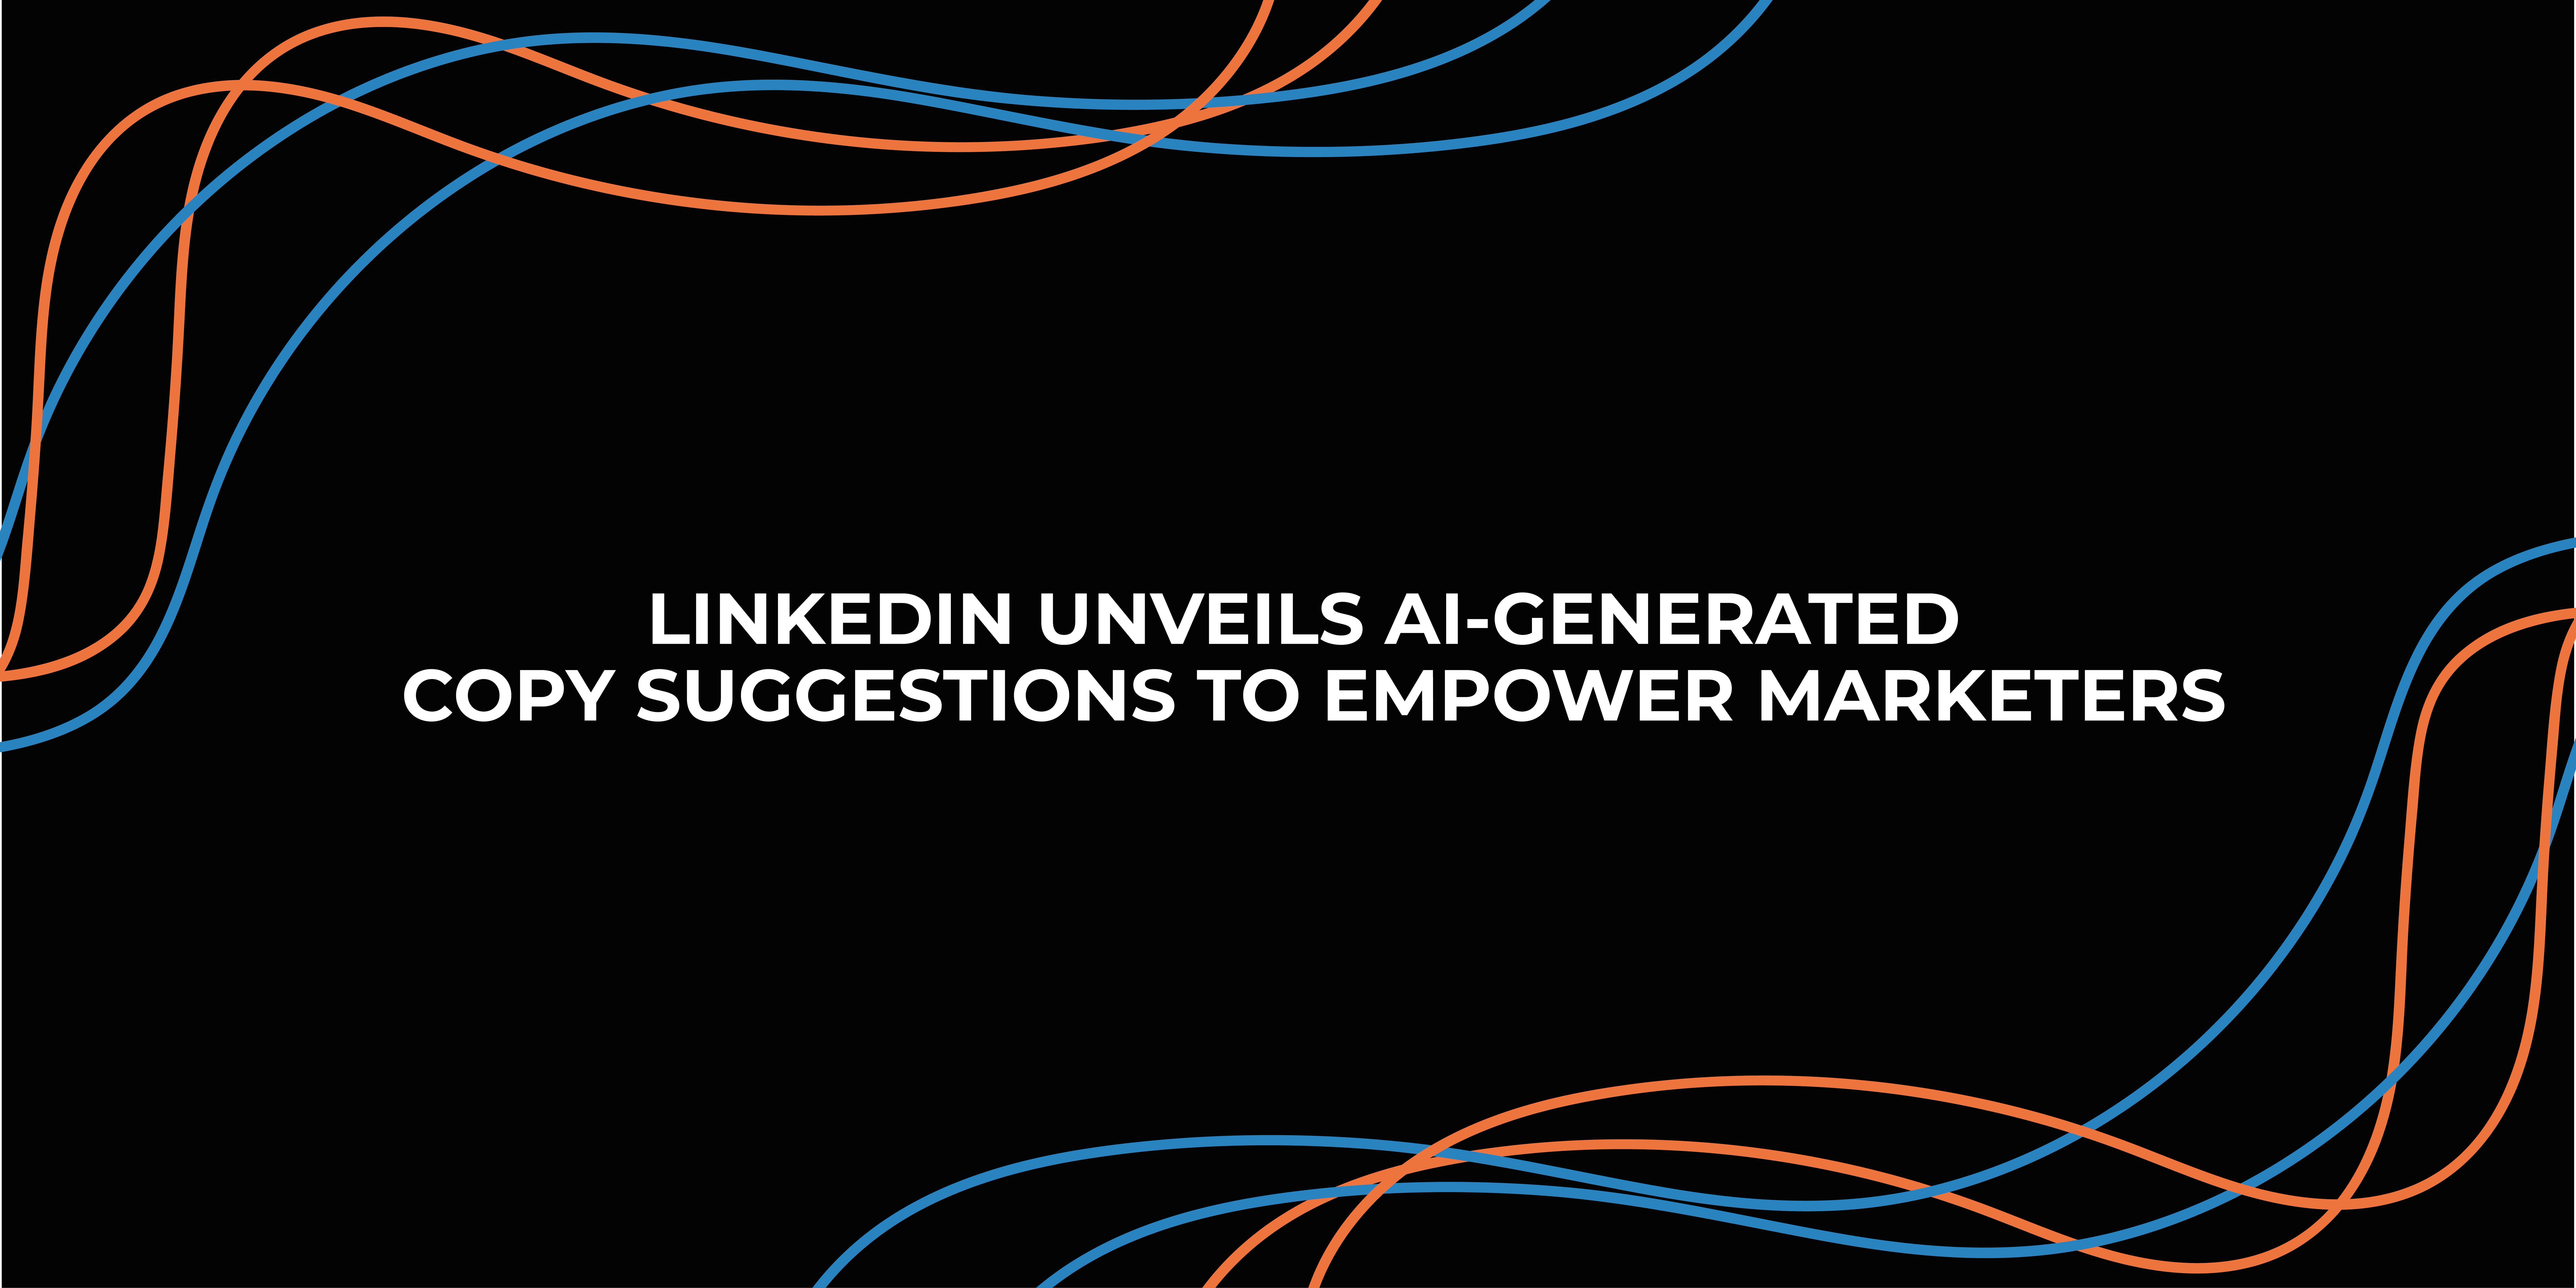 LinkedIn unveils AI-generated suggestion to empower marketers